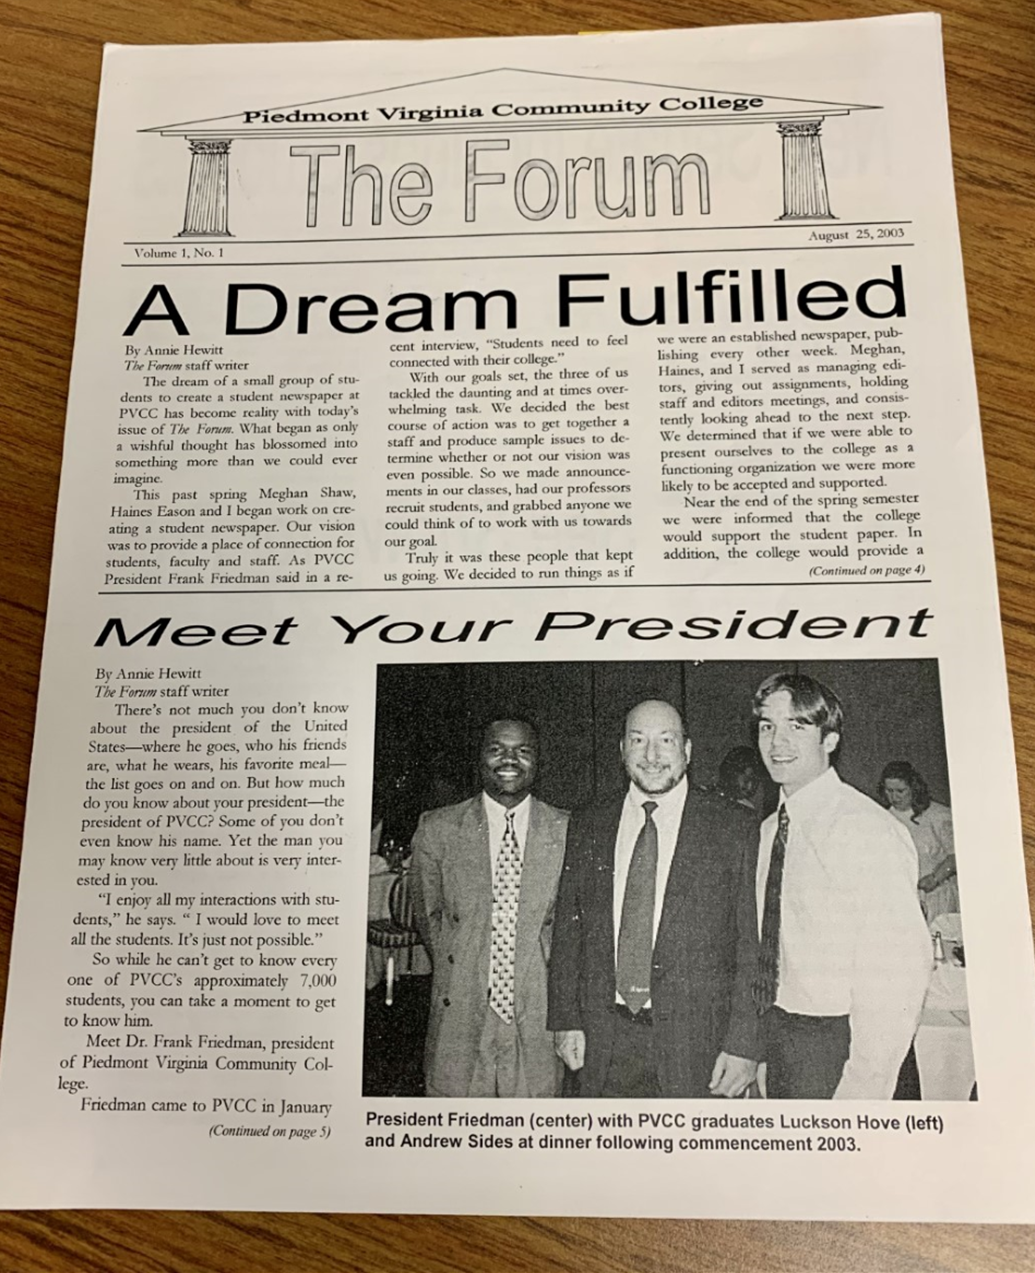 The front page of the school newspaper. It says "The Forum" at the top, with two articles below and a picture of three men.